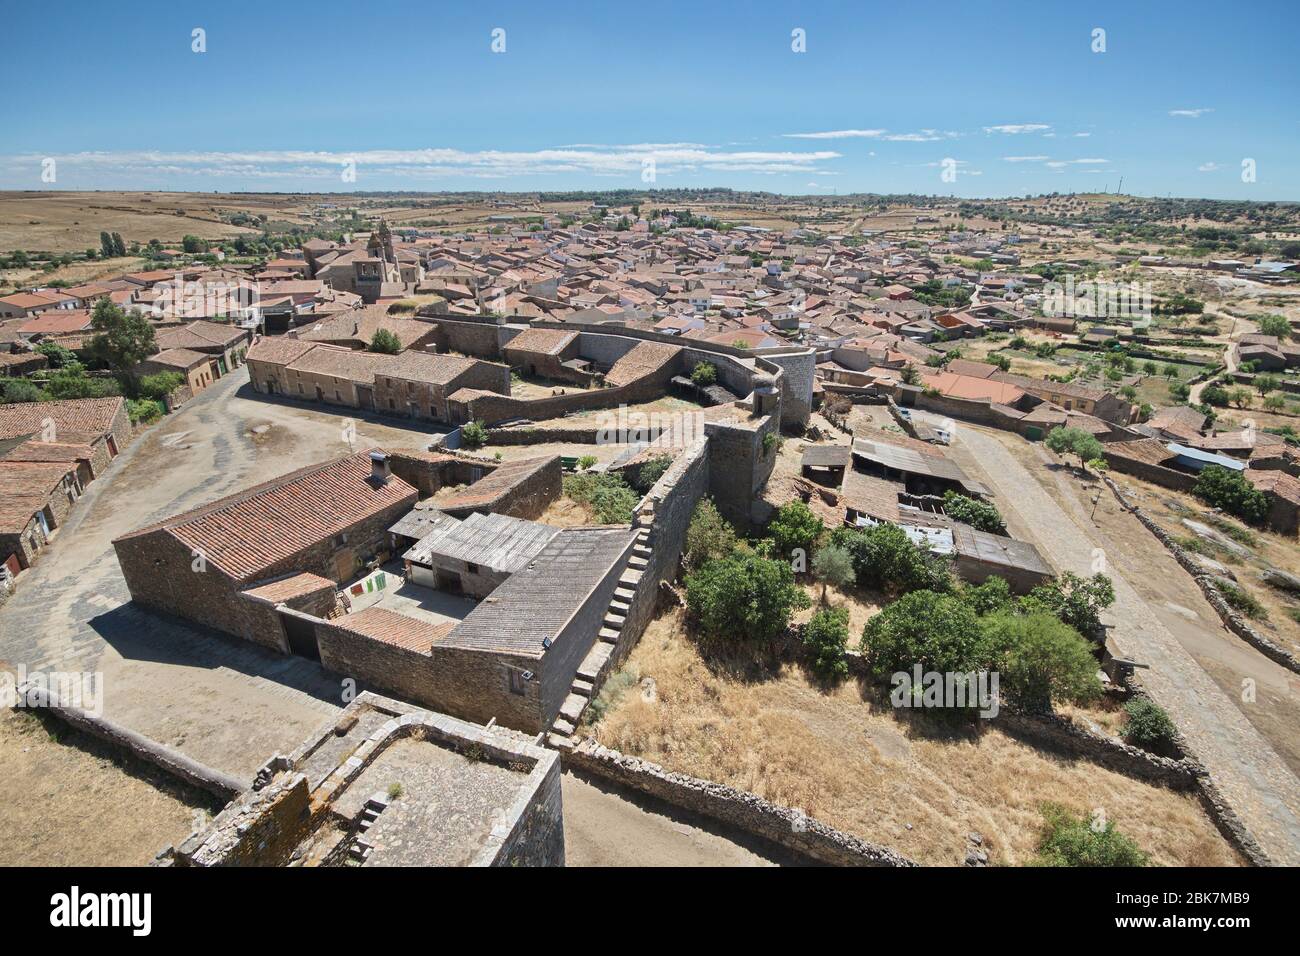 San Felices de los Gallegos, Salamanca/Spain; Aug. 07, 2013. View of the town of San Felices de los Gallegos from the Tower of Tribute. Stock Photo